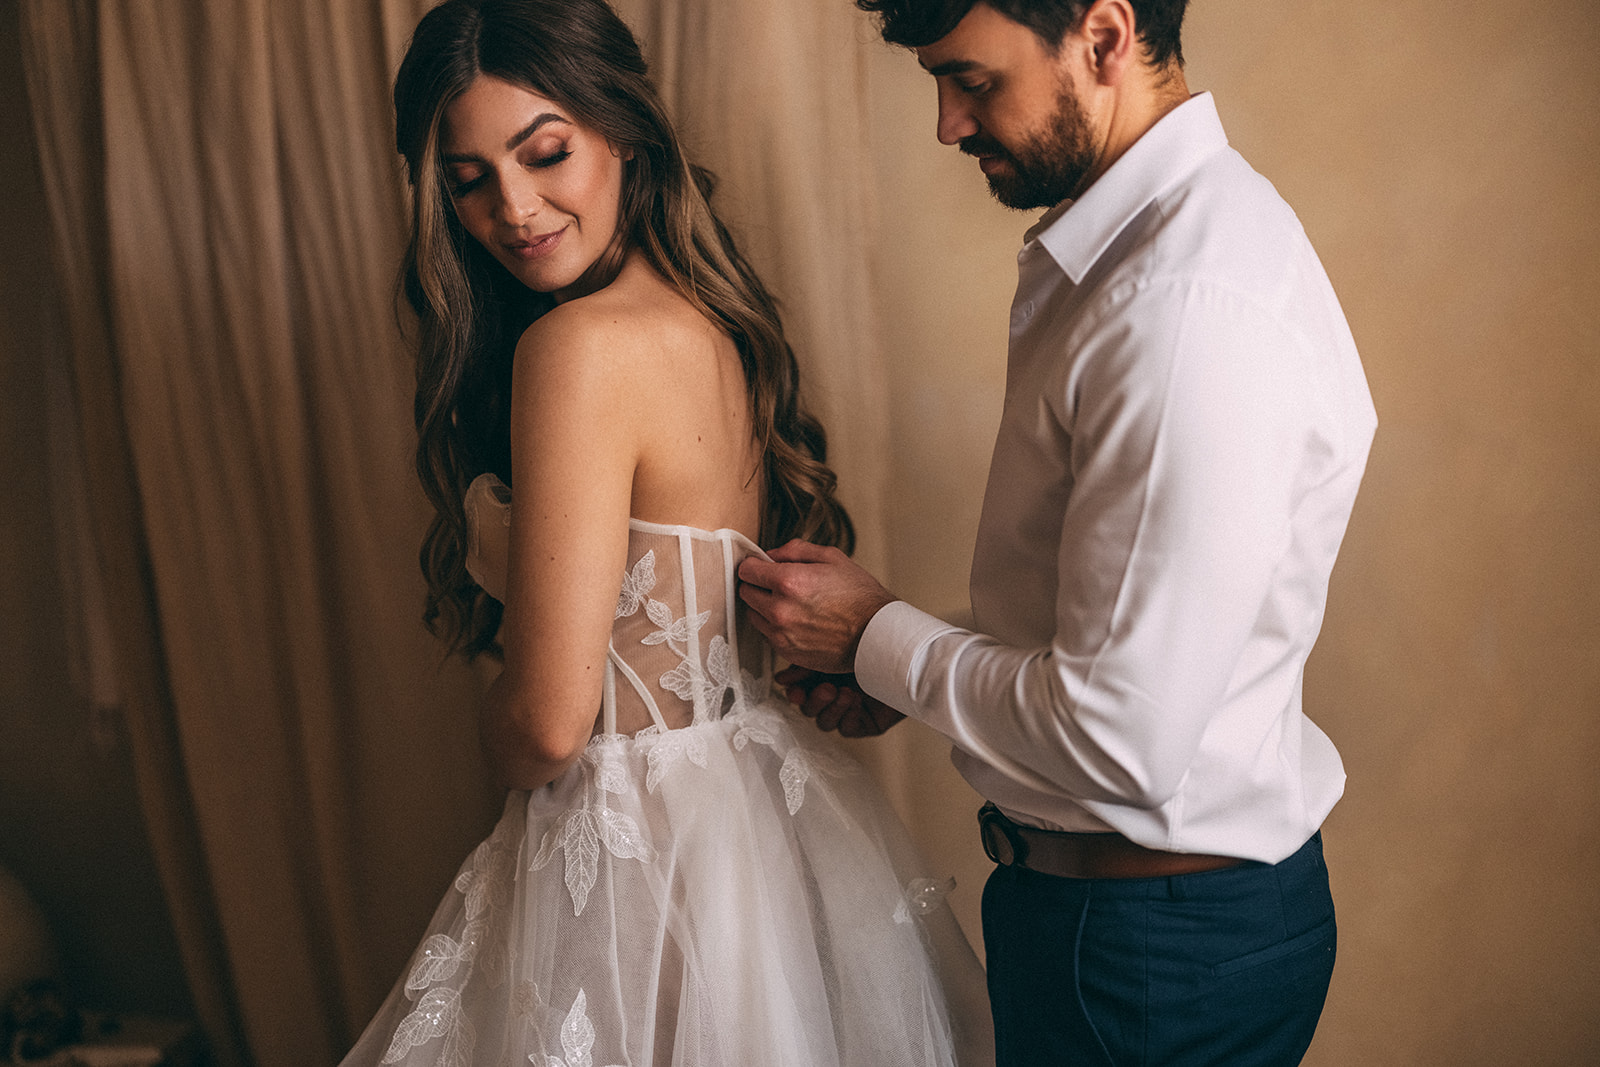 Getting ready photos with your partner on your wedding day 